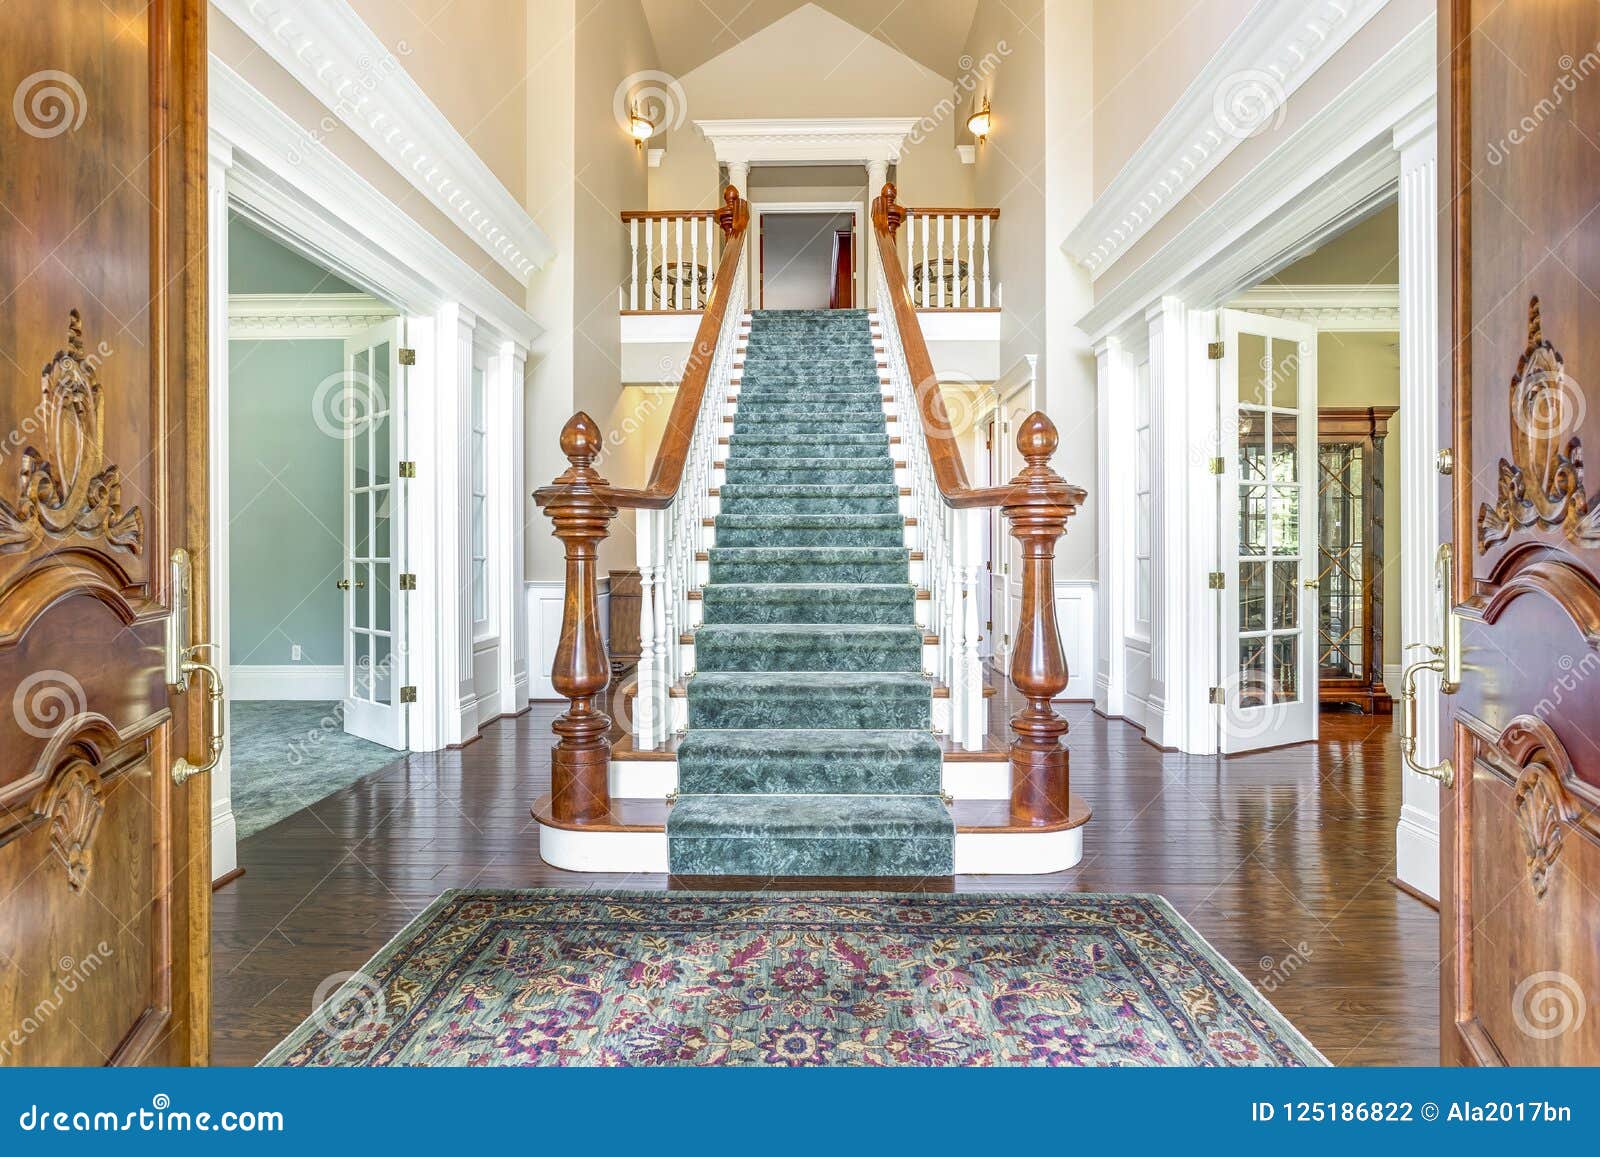 grand two story foyer with elegant staircase.